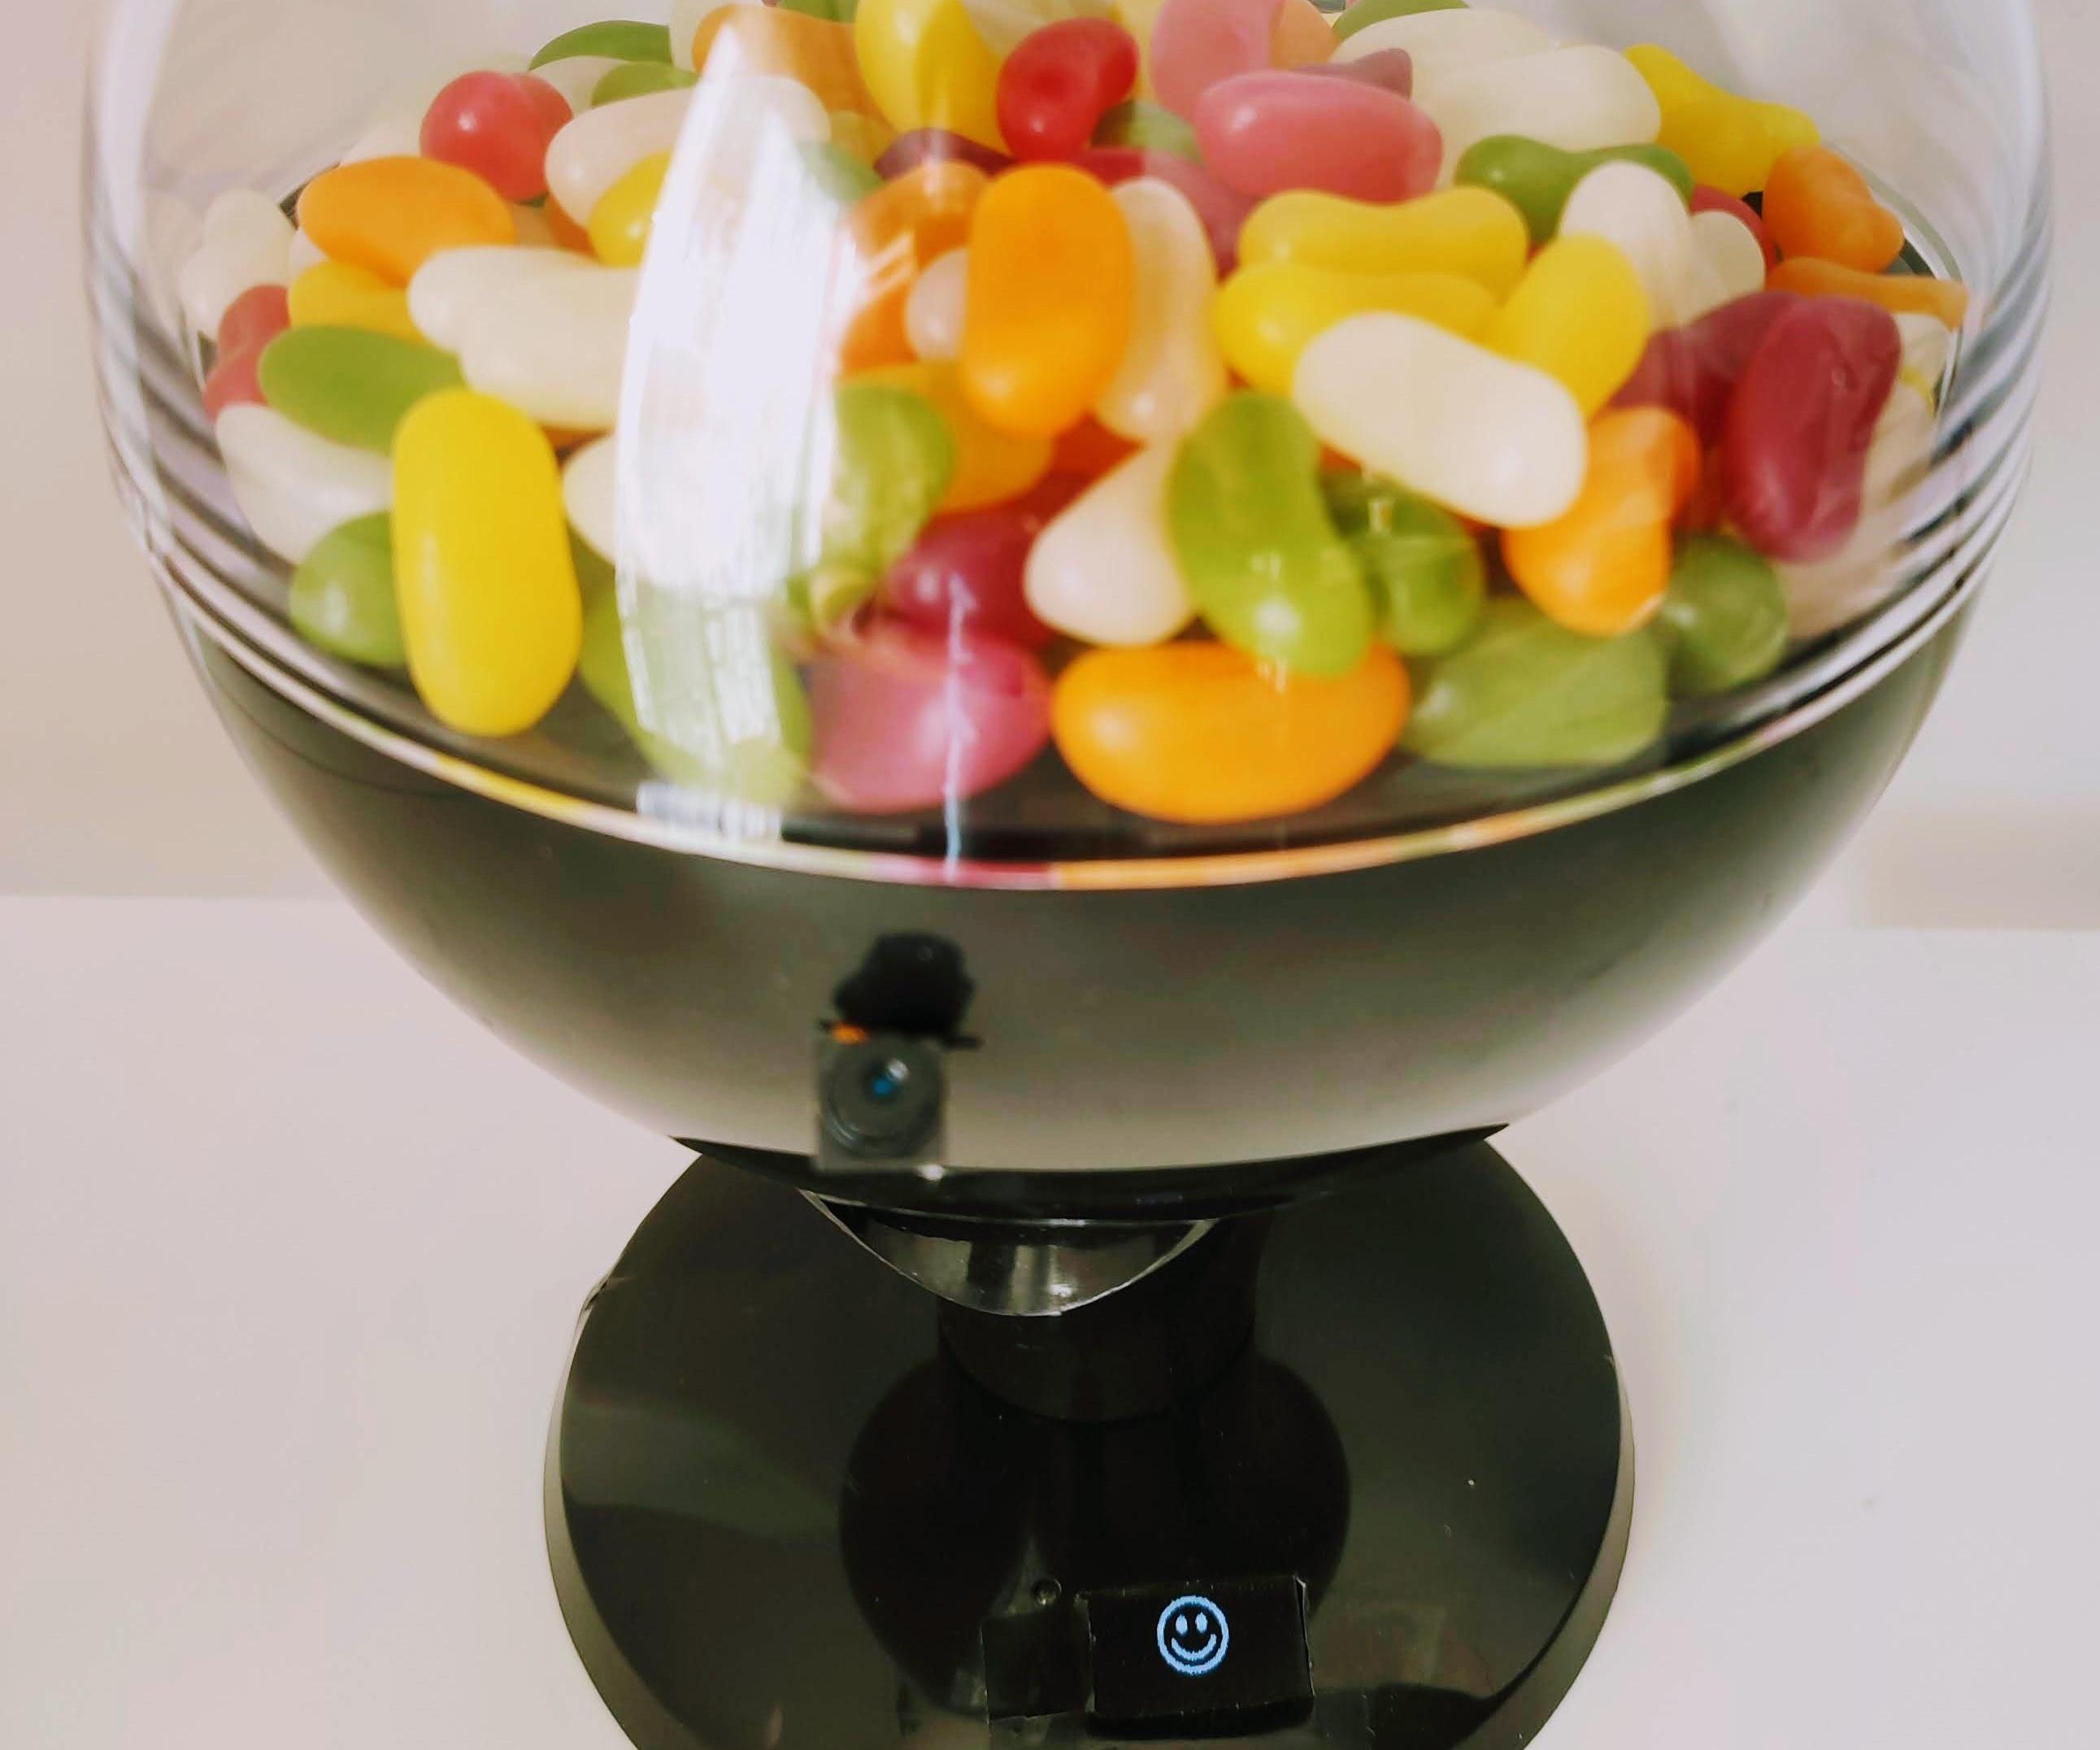 Candy Dispenser With Face Recognition